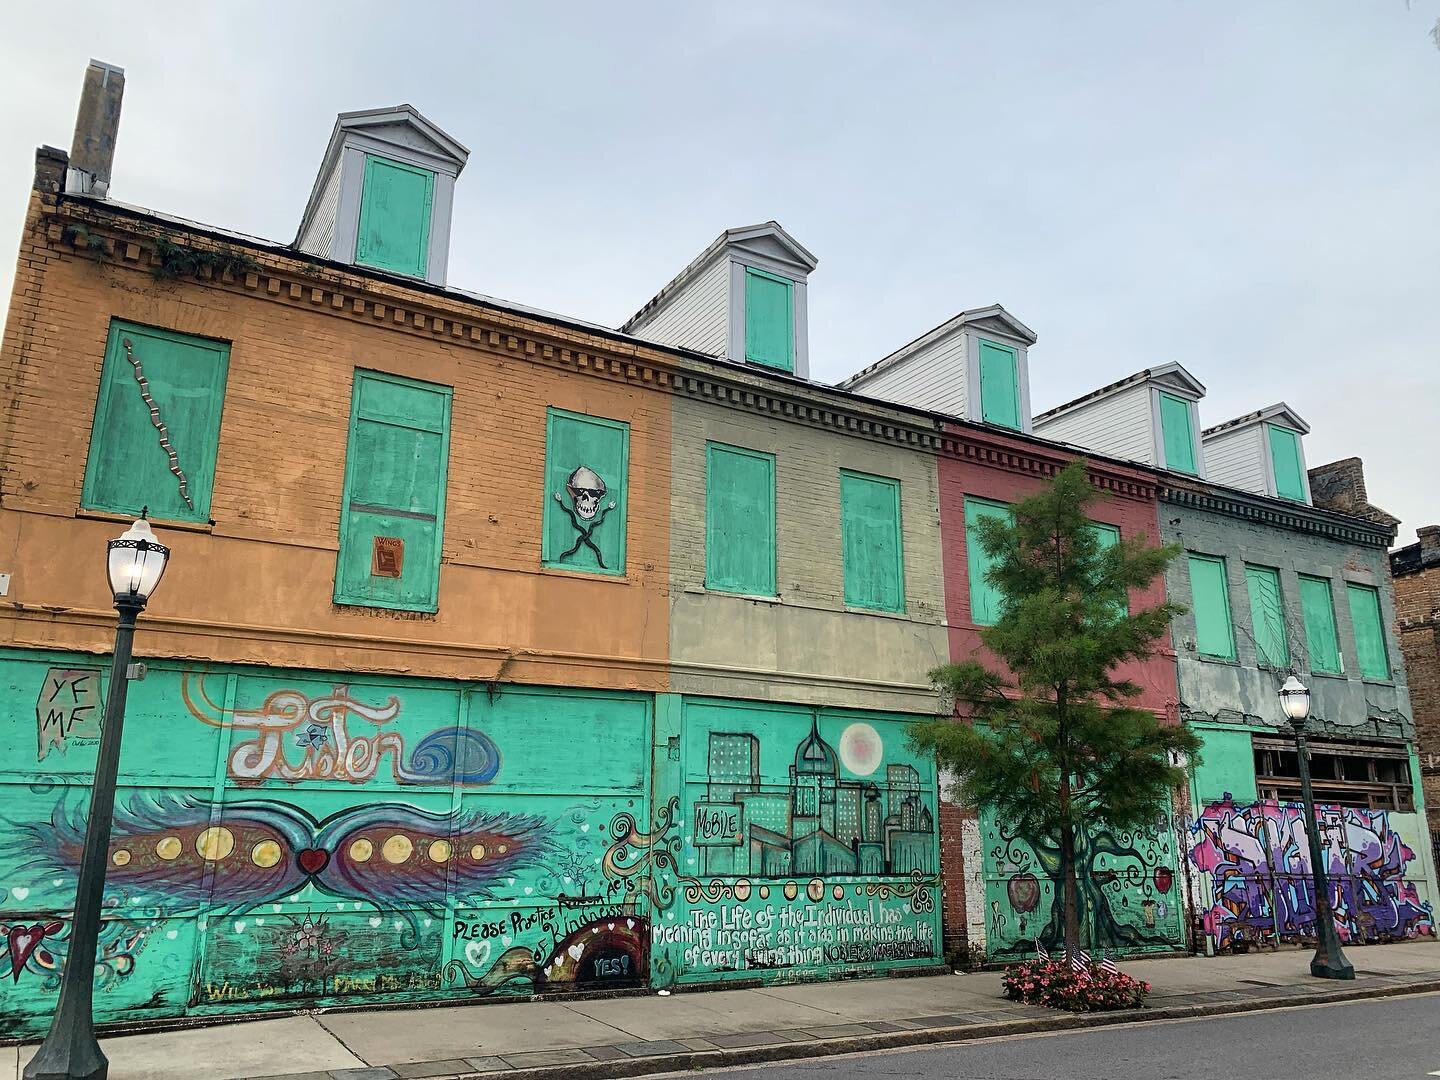 Dauphin St is a bustling downtown corridor, but it still has a few spots that need some love.